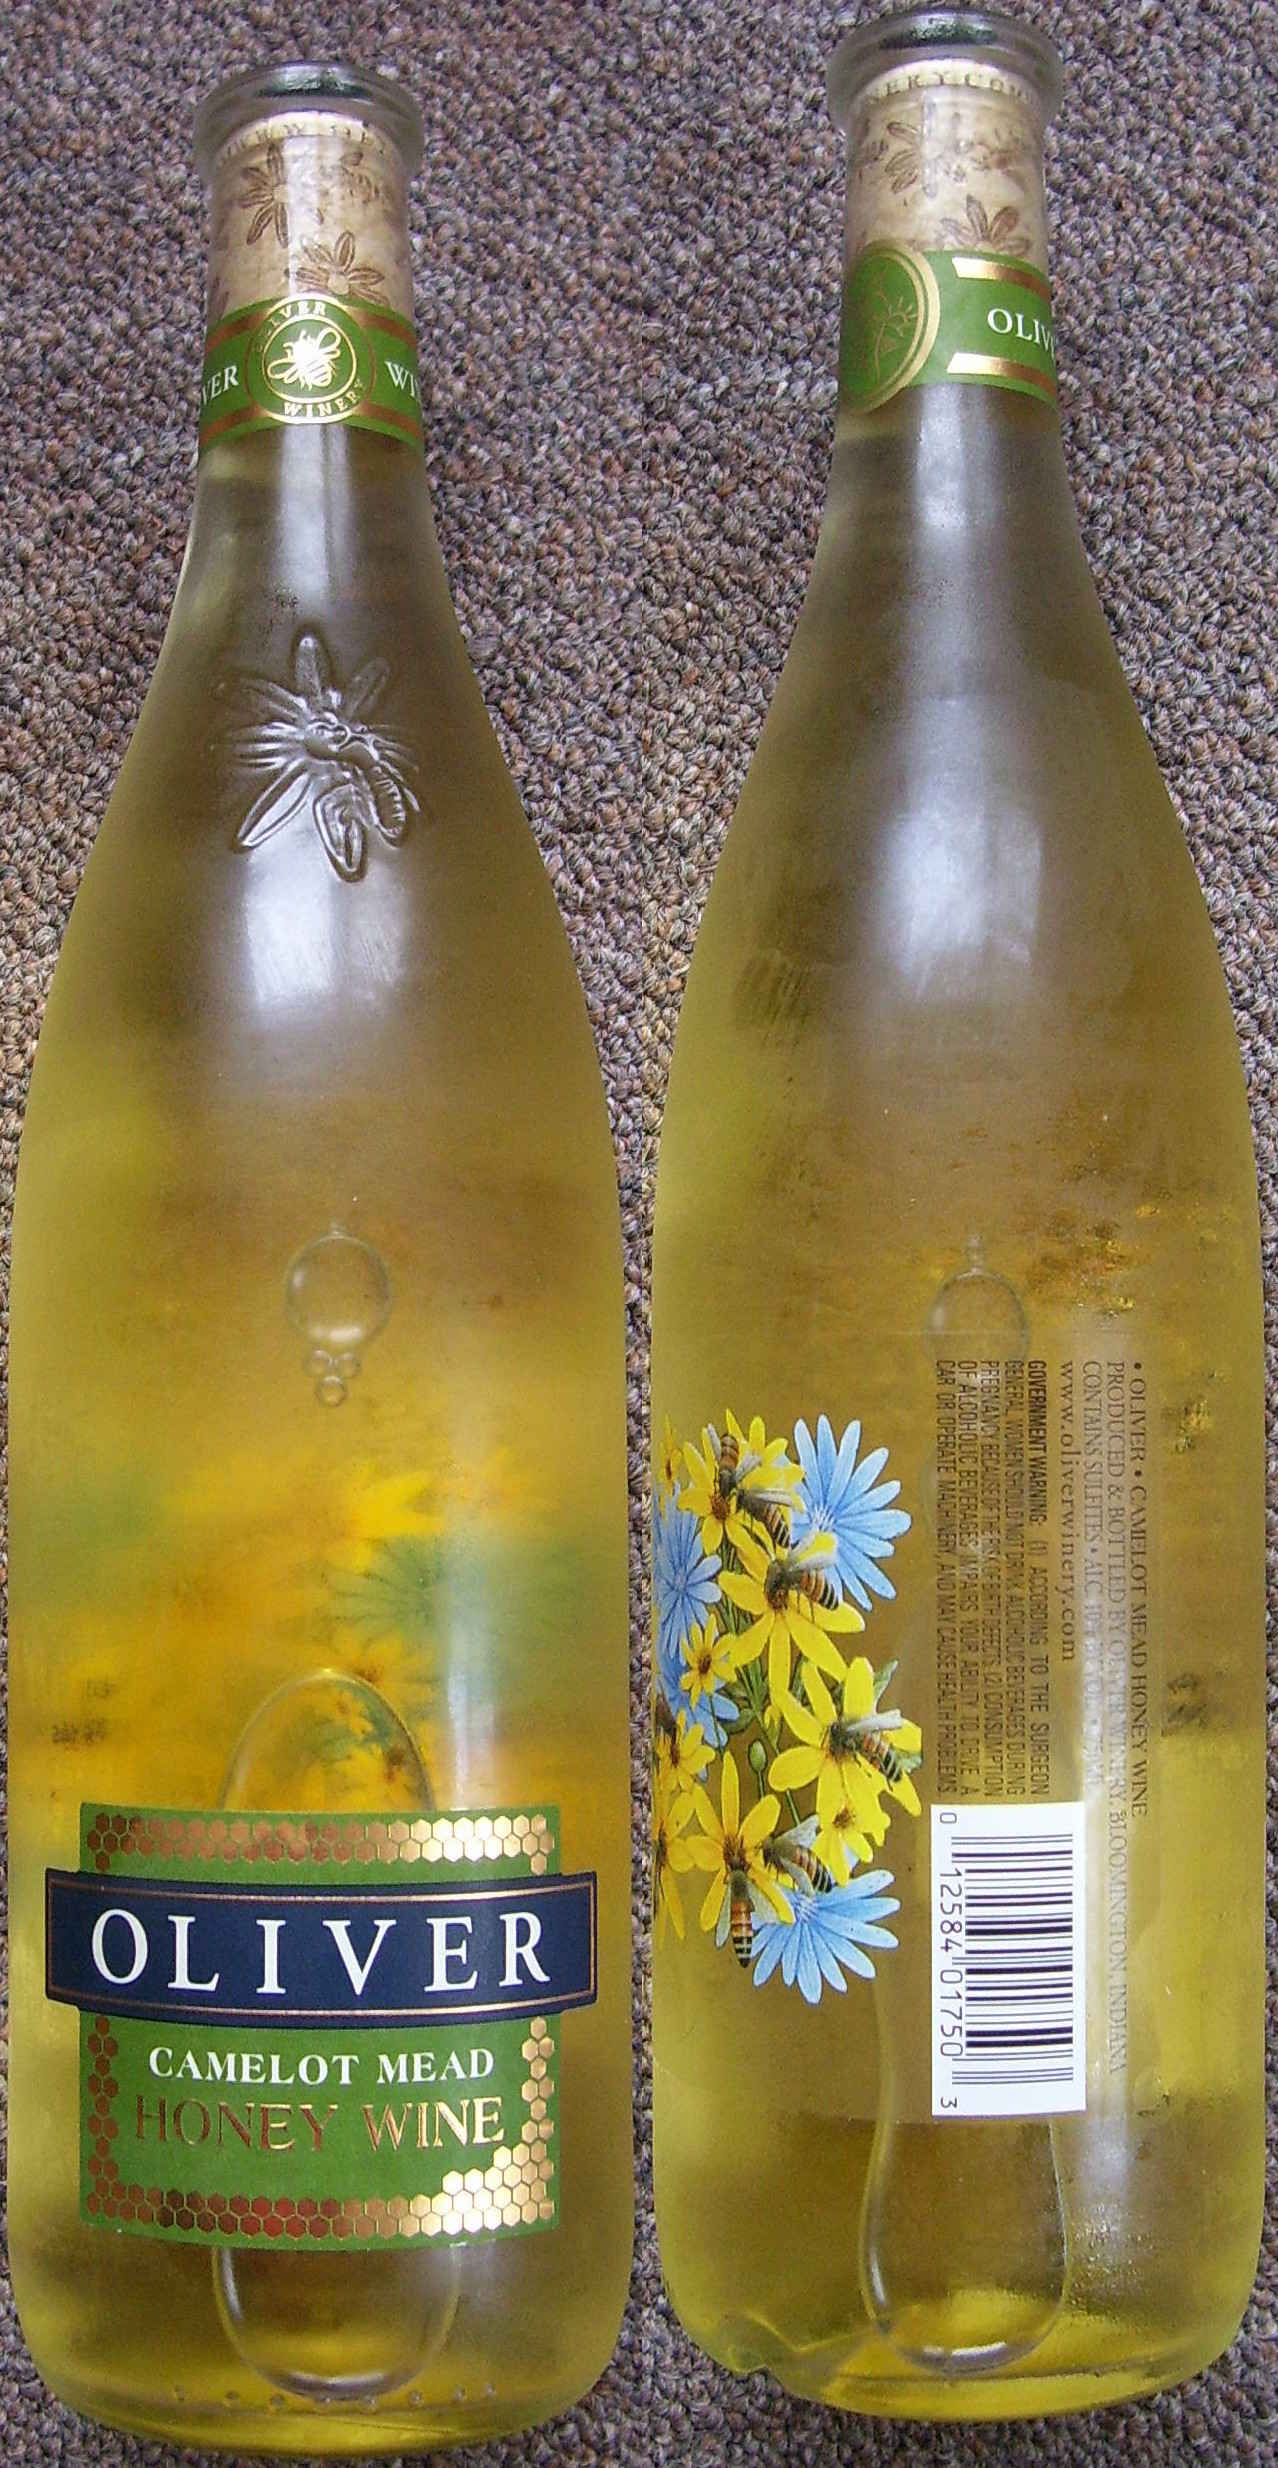 Camelot Mead, front/back